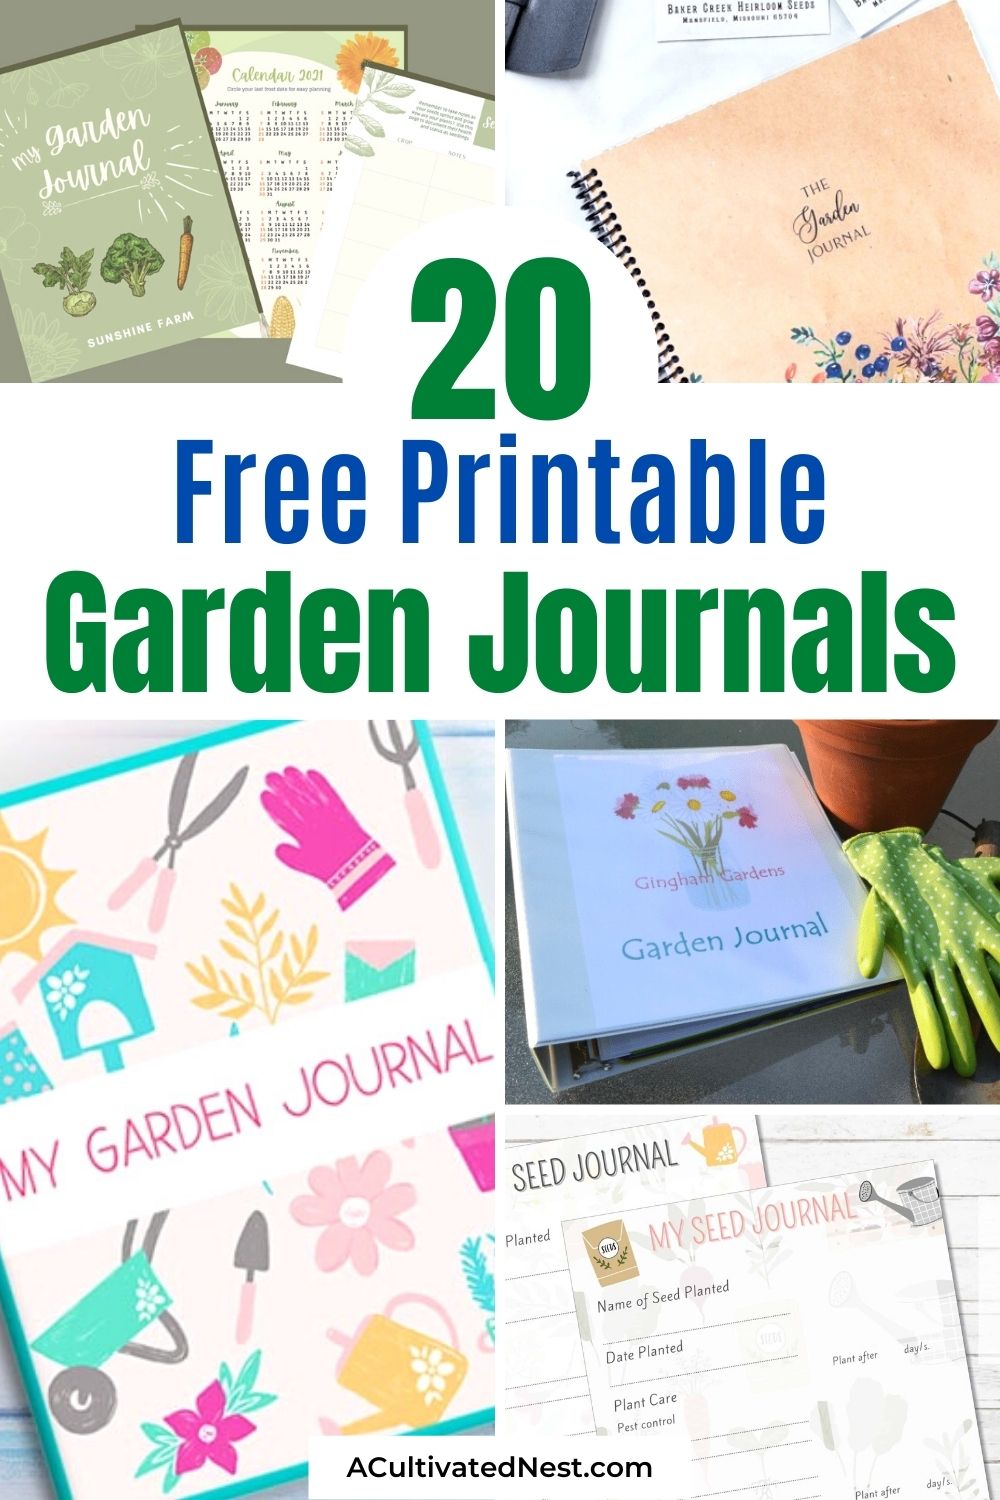 20 Handy Free Printable Garden Journals- An easy way to improve your garden year after year is by recording your experiences in one of these free printable garden journals! Then you can read through what did and didn't work and make your garden better year after year! | #freePrintables #gardening #gardenJournal #gardenPlanner #ACultivatedNest